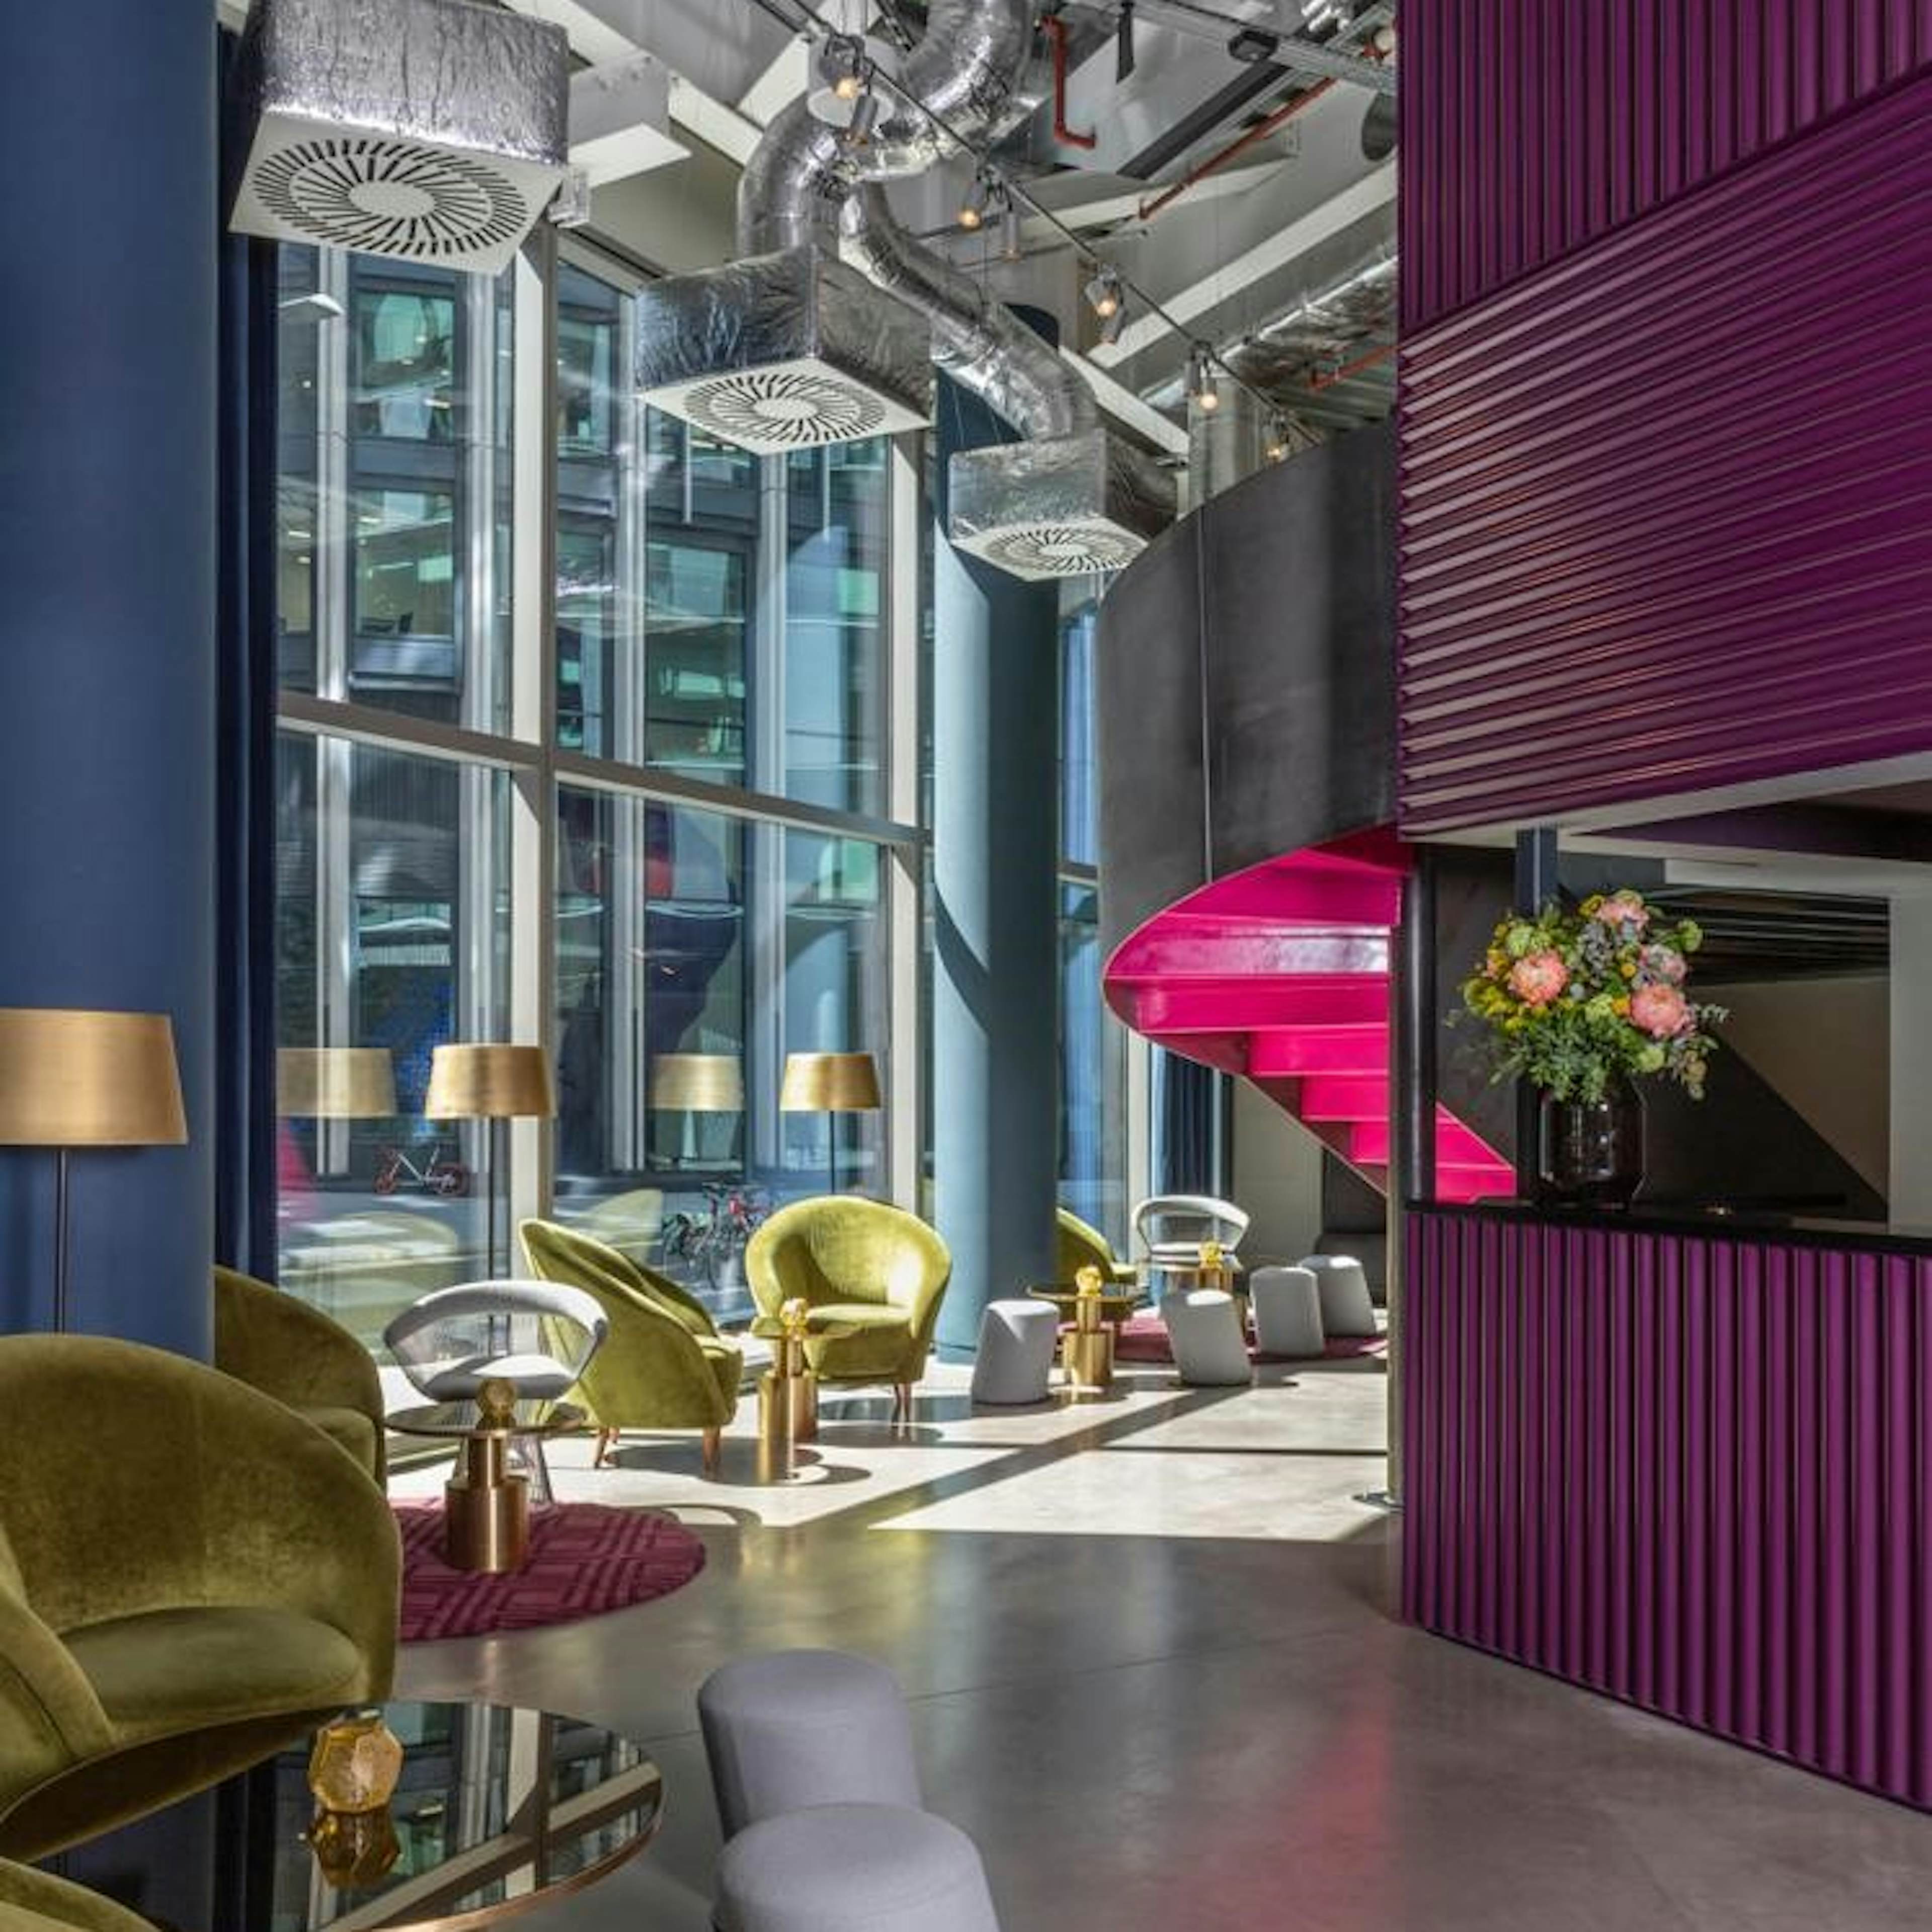 Sea Containers Hotel London - Gallery image 1